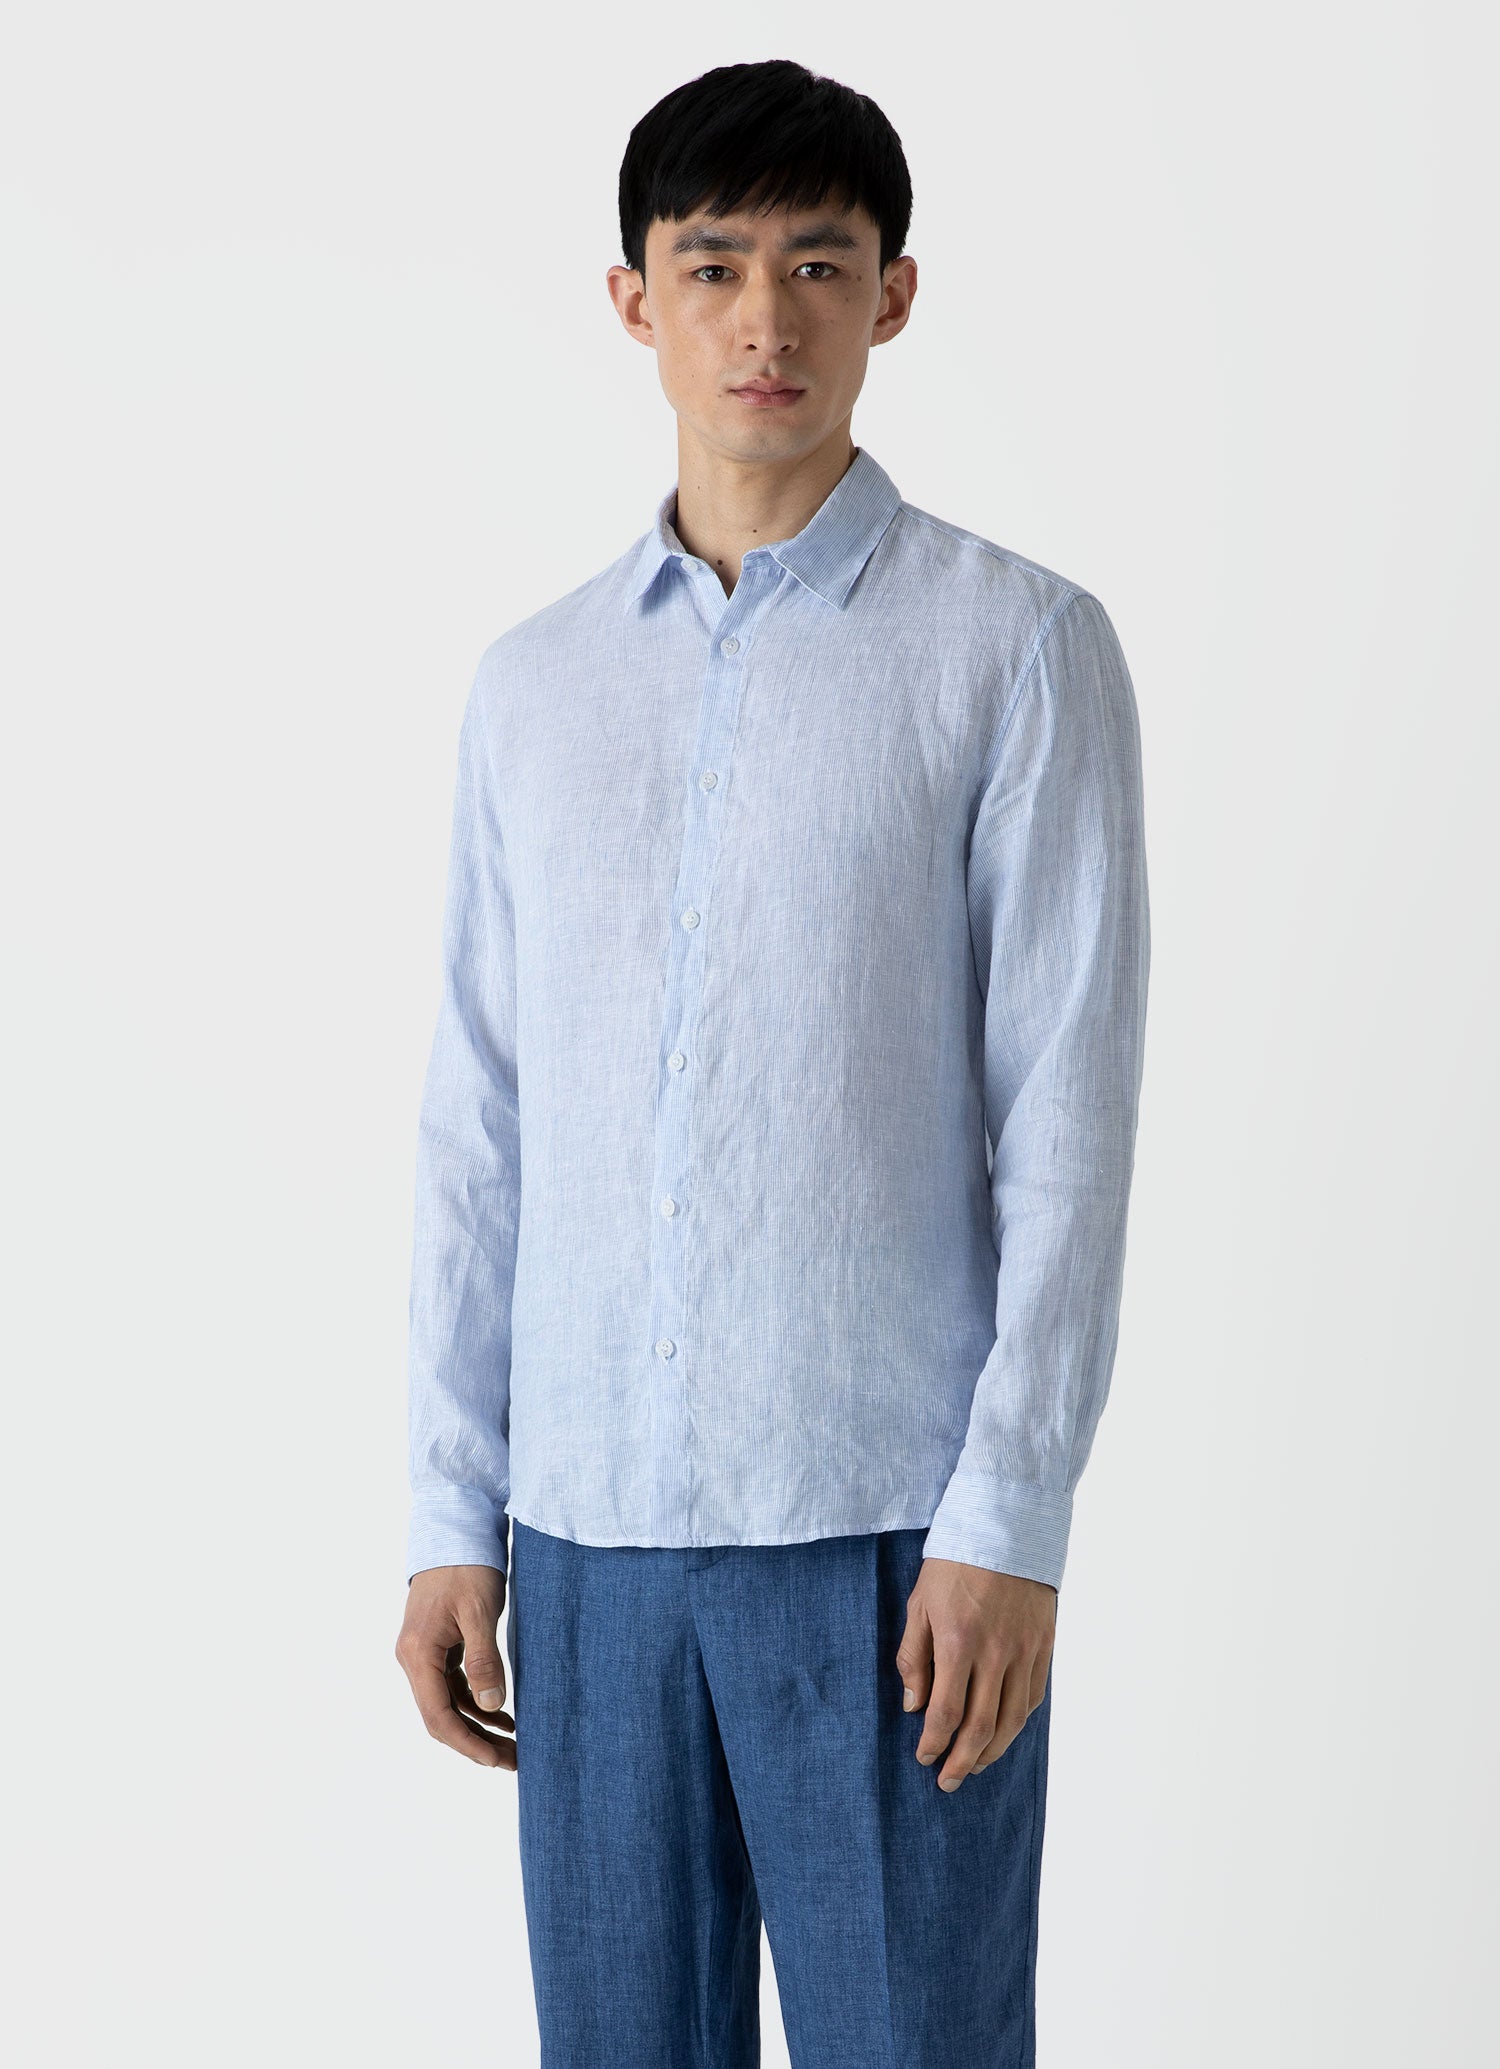 Ice Blue Casual Cotton Linen Shirt By Nologo, NLFFHS-138N